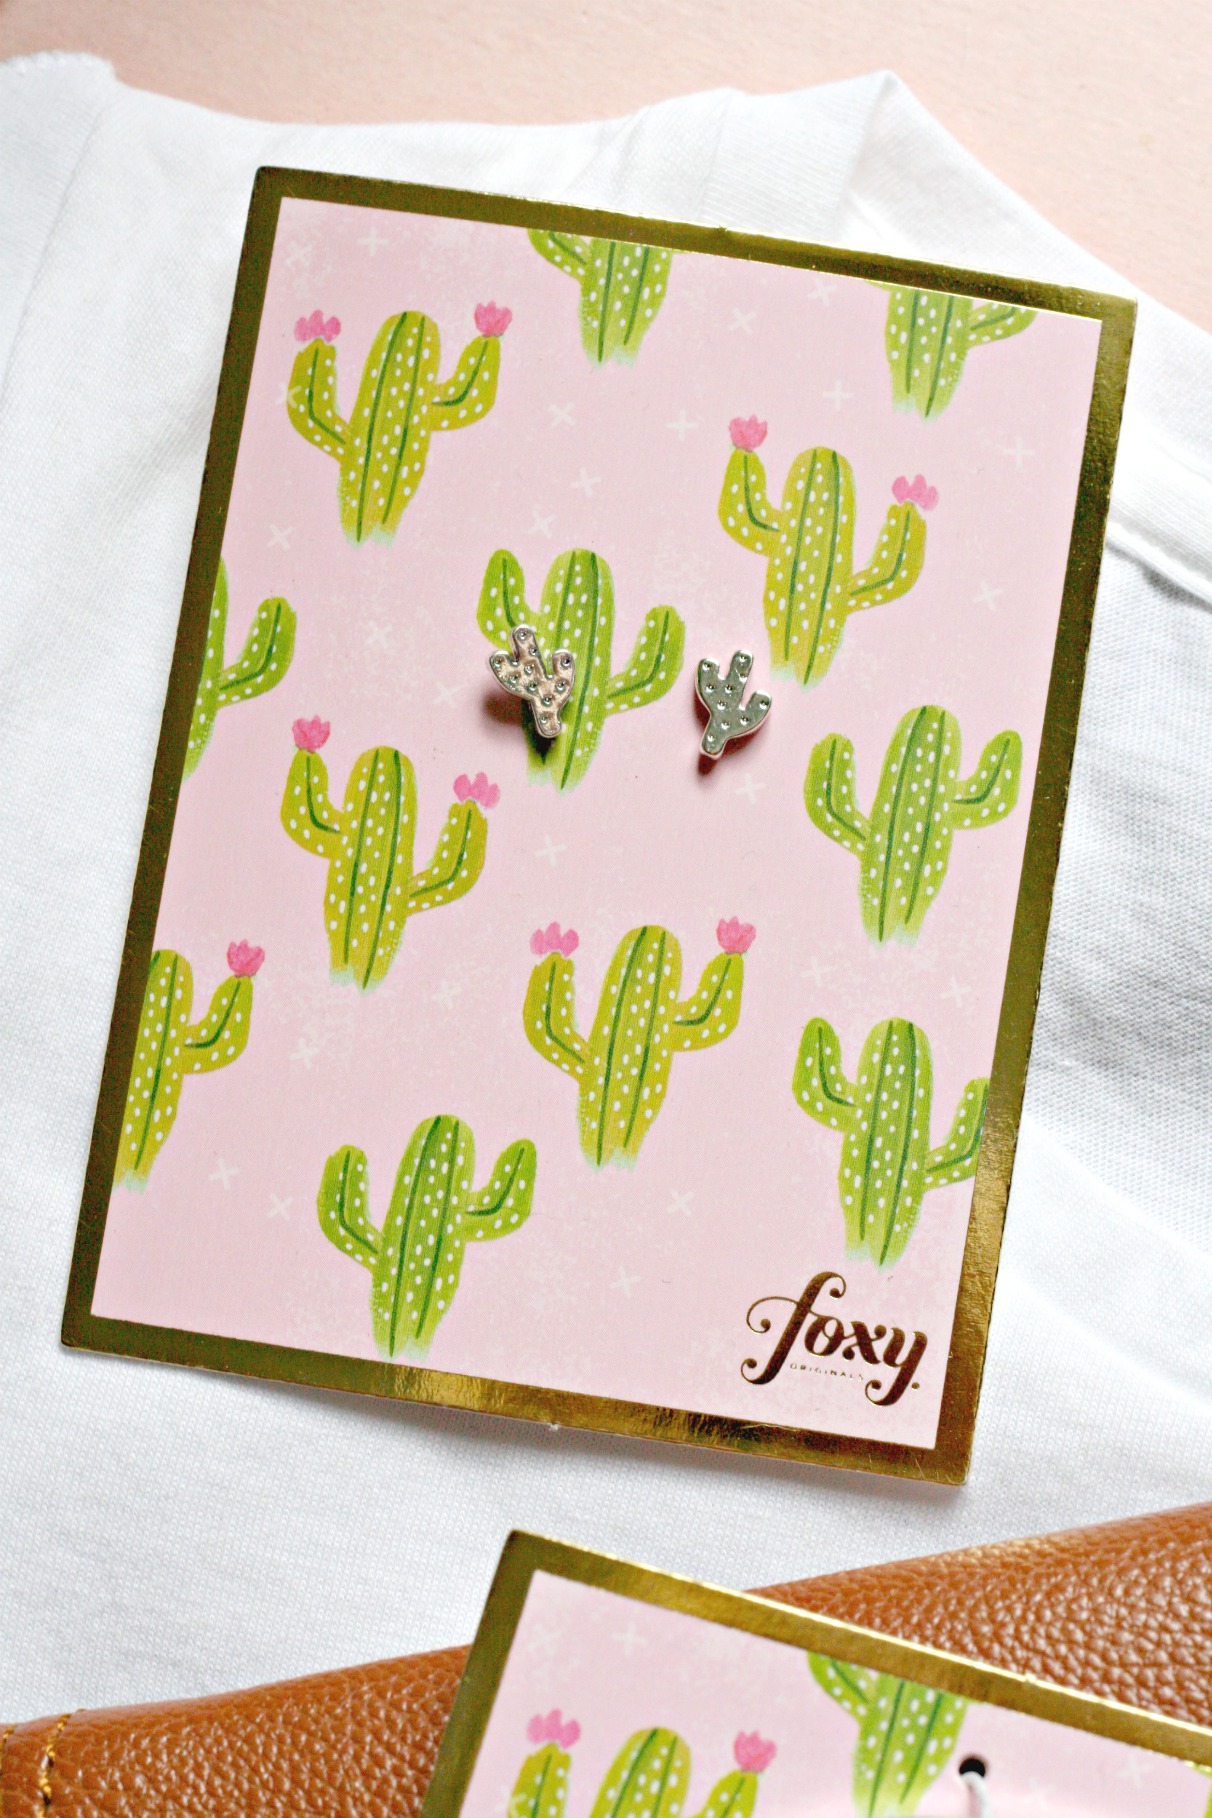 Foxy Originals cactus earrings try small things